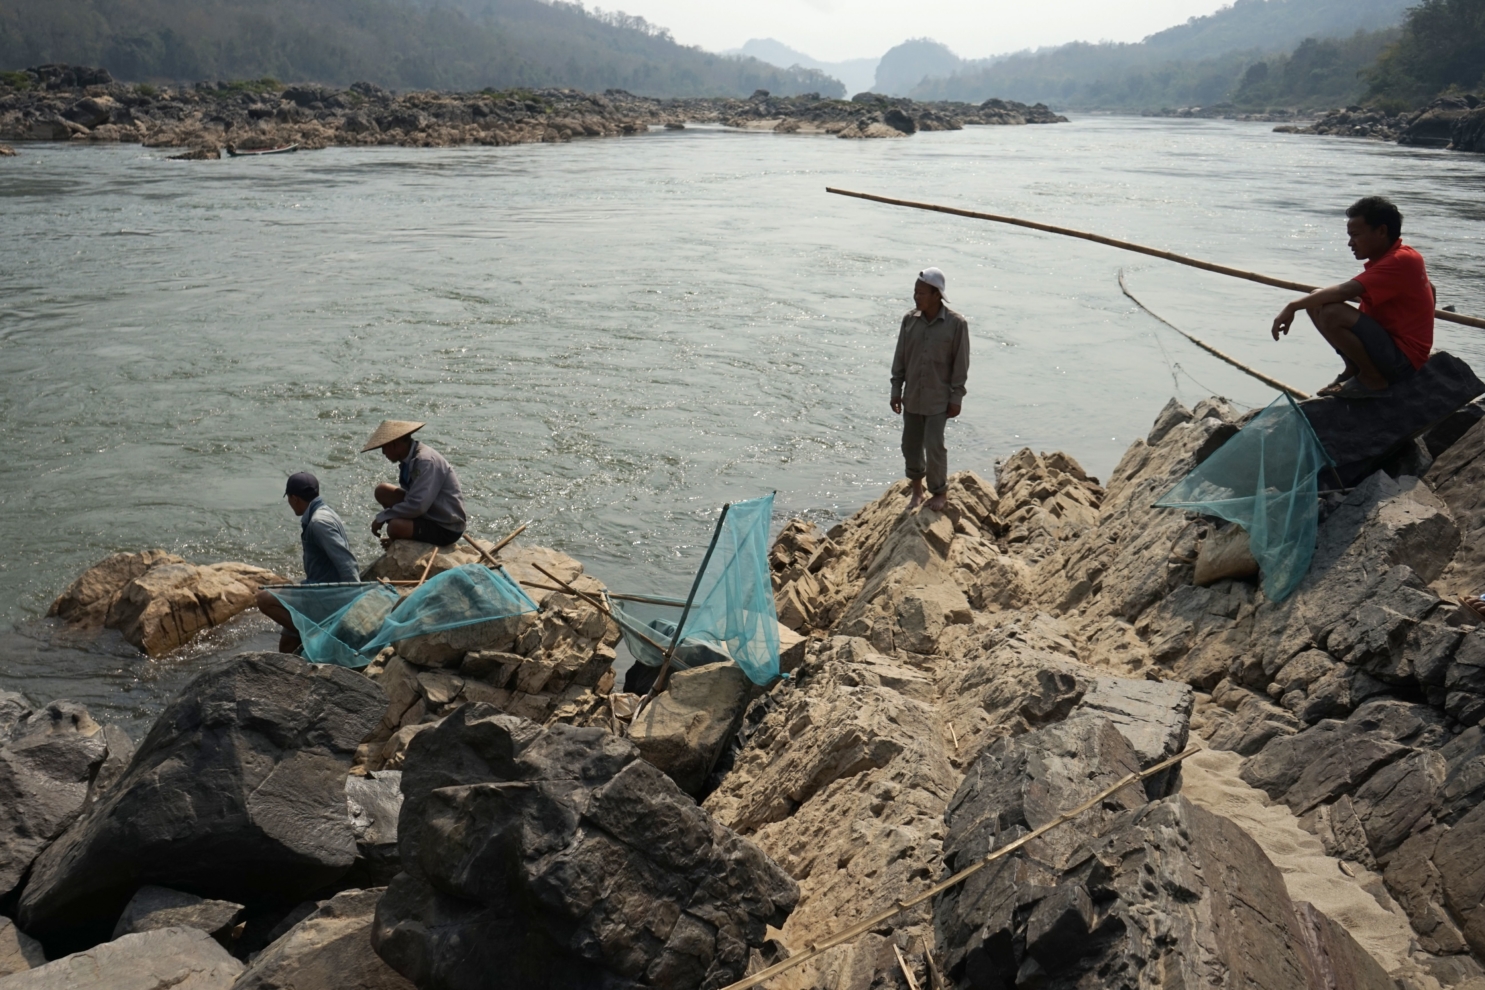 This photo taken on February 8, 2020 shows fishermen laying their nets on the Mekong River near Luang Prabang close to the site of an approved Laos dam site. - Environmentalists on May 12, 2020 have criticised Laos for pressing ahead with plans for another "destructive dam" on the Mekong River, a waterway already strangled by hydropower schemes. (Photo by Aidan JONES / AFP) (Photo by AIDAN JONES/AFP via Getty Images)